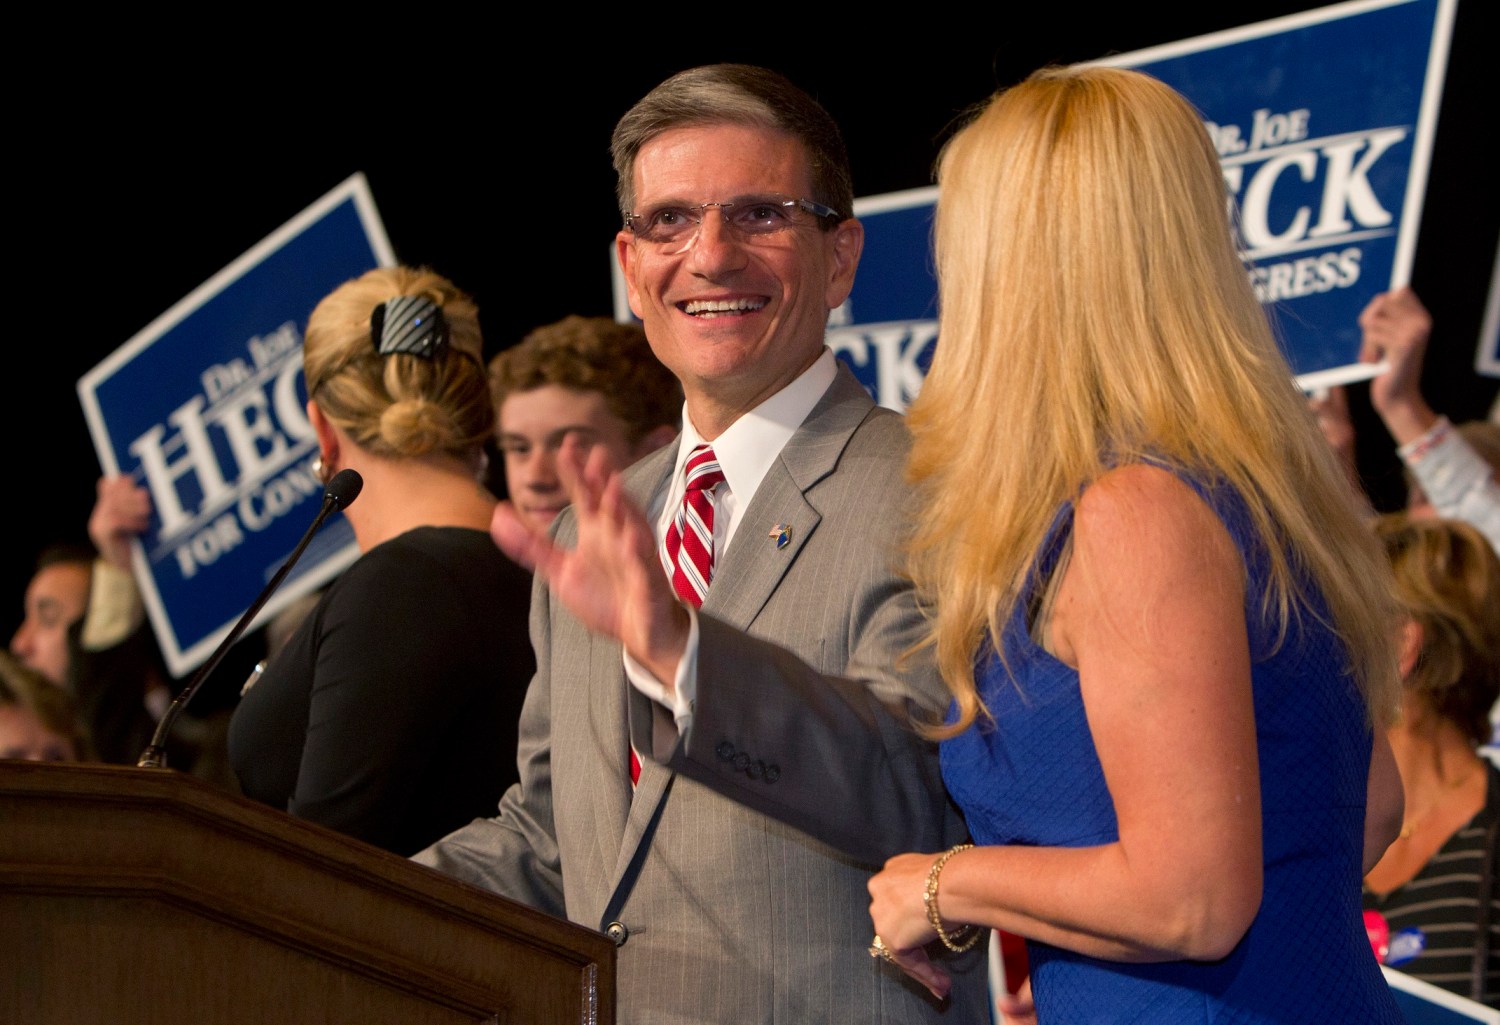 U. S. Rep. Joe Heck (R-NV) arrives to thank supporters, after defeating Democrat challenger John Oceguera, during a Republican election night party at the Venetian Resort in Las Vegas, Nevada, November 6, 2012. REUTERS/Las Vegas Sun/Steve Marcus (UNITED STATES - Tags: POLITICS USA PRESIDENTIAL ELECTION ELECTIONS) - RTR3A3QZ